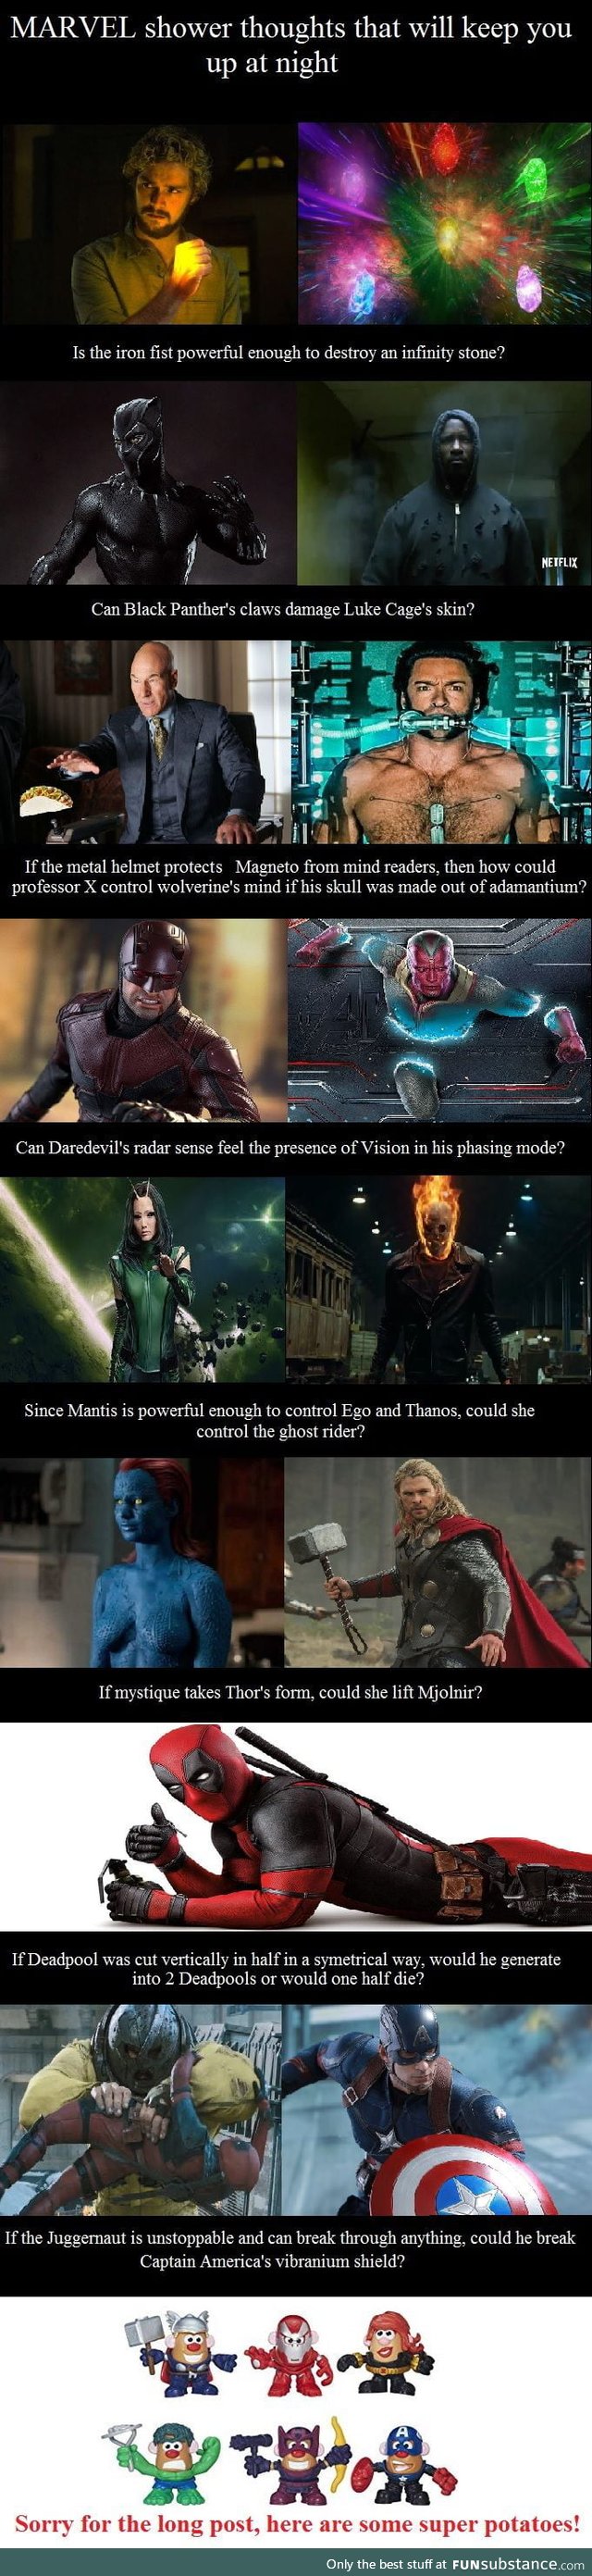 Marvel shower thoughts